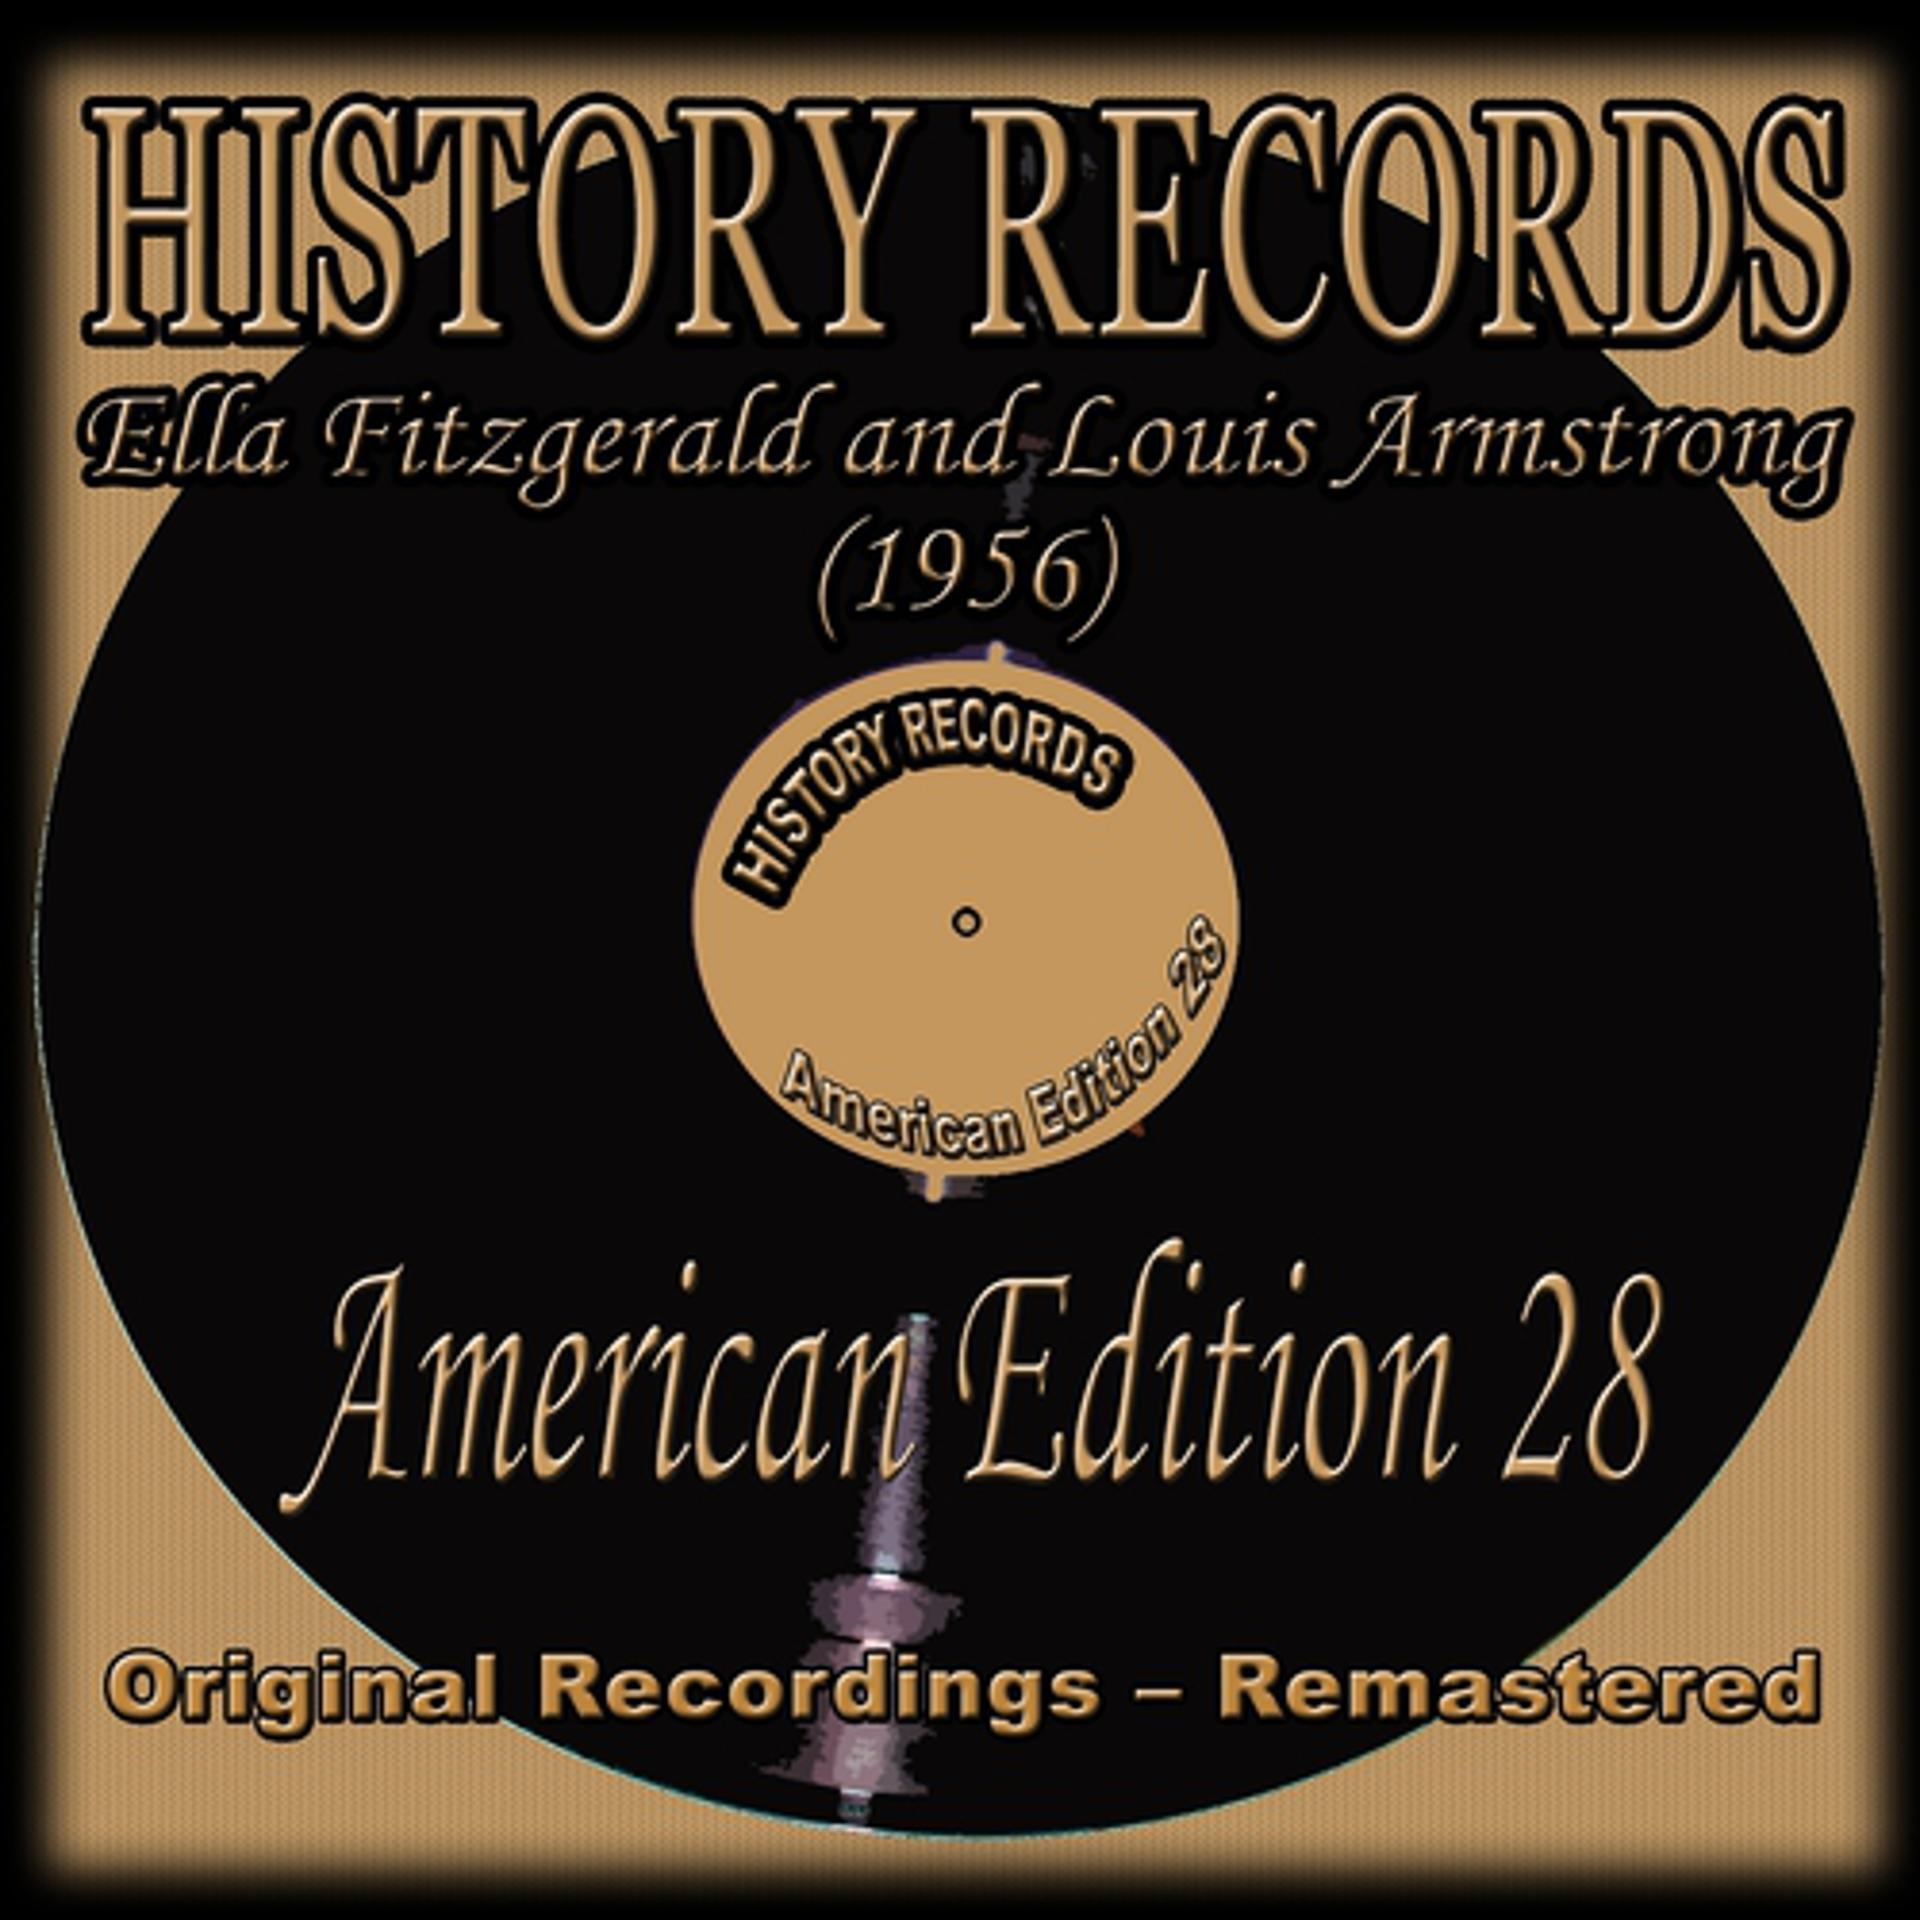 Постер альбома Ella Fitzgerald and Louis Armstrong (1956) (History Records - American Edition 28 - Original Recordings - Remastered)